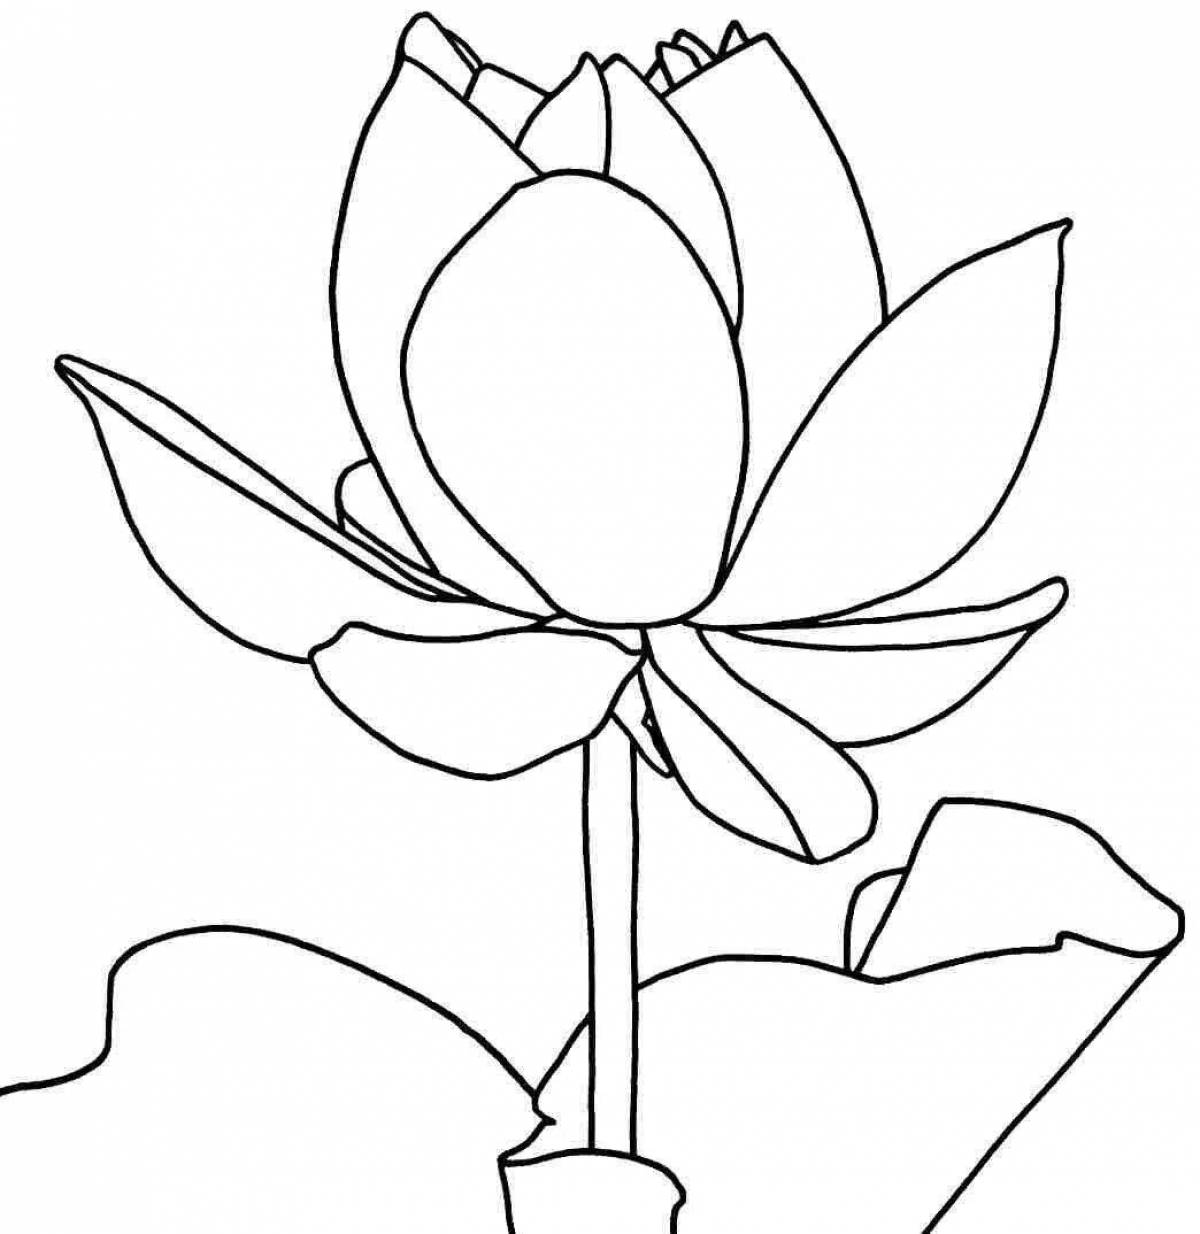 Coloring book magic stone flower for kids